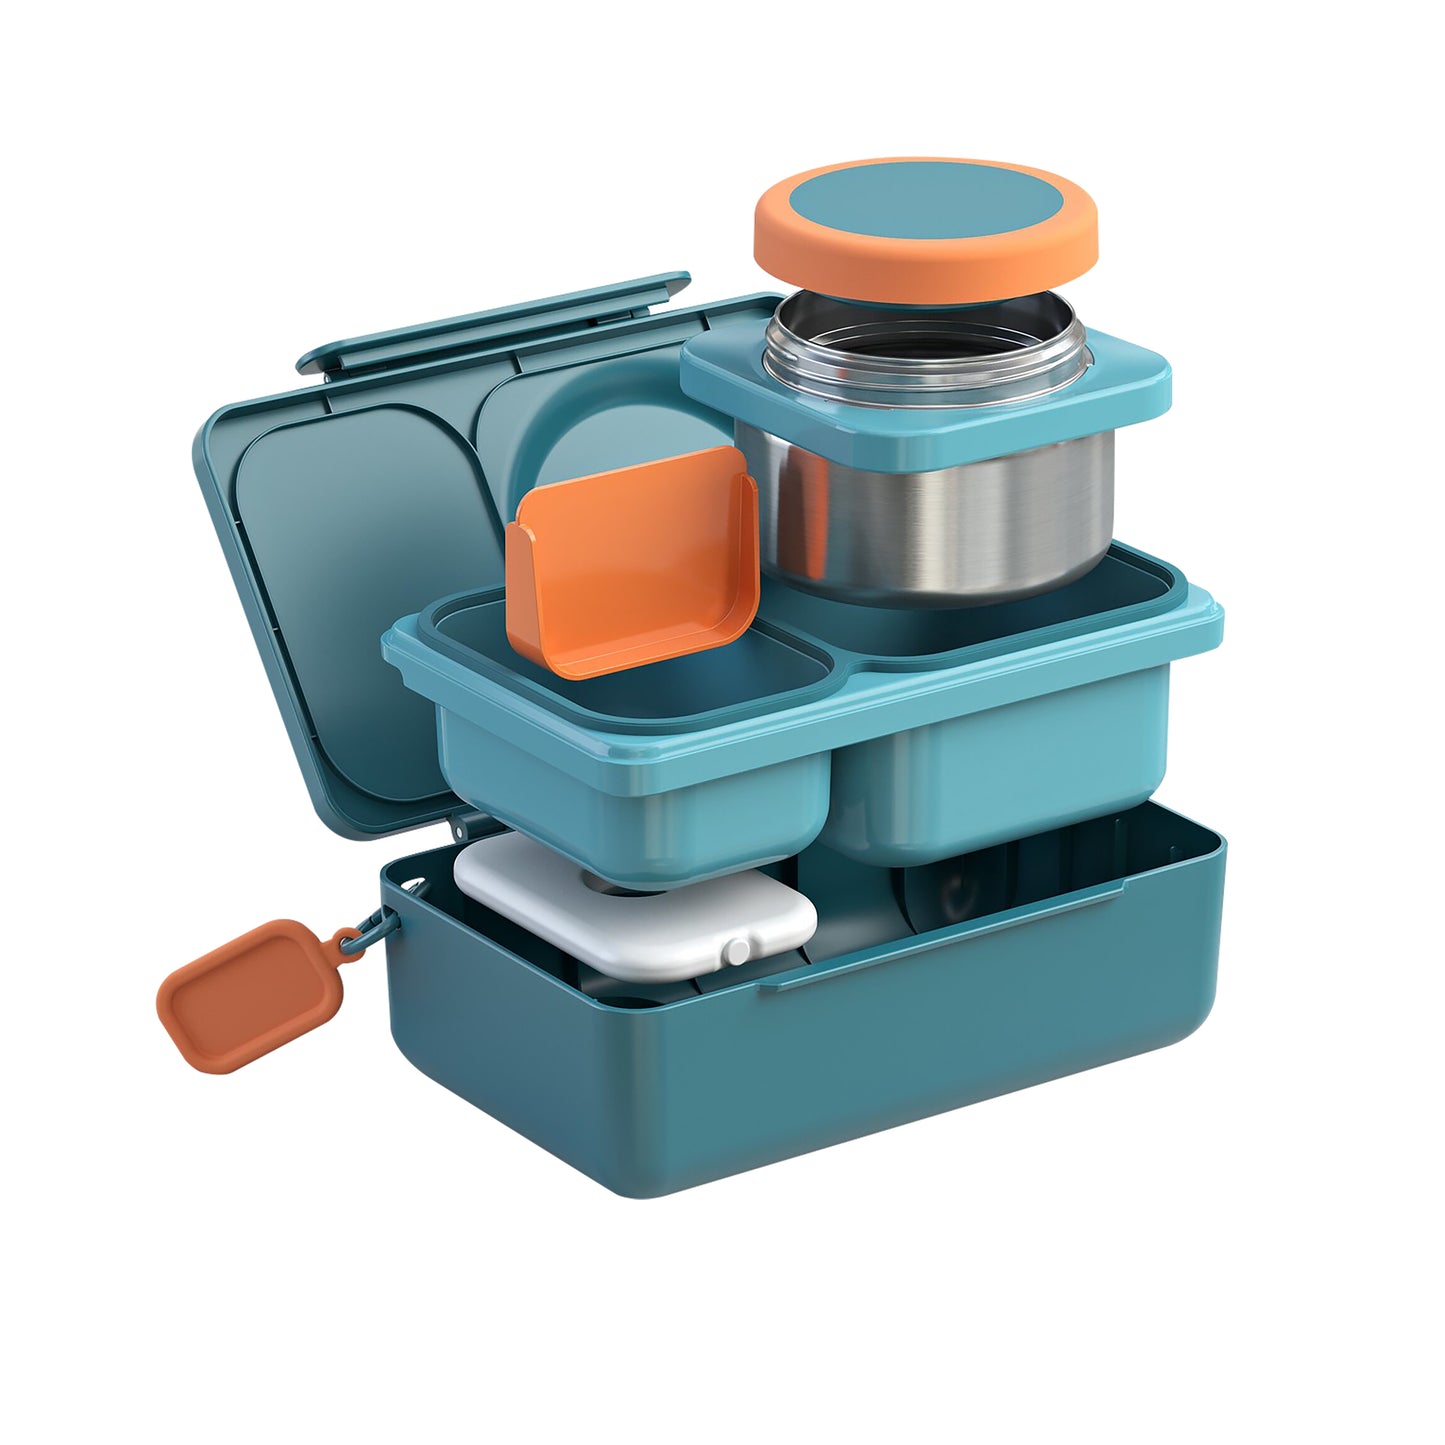 OmieBox UP Hot and Cold Bento Box - Teal Green